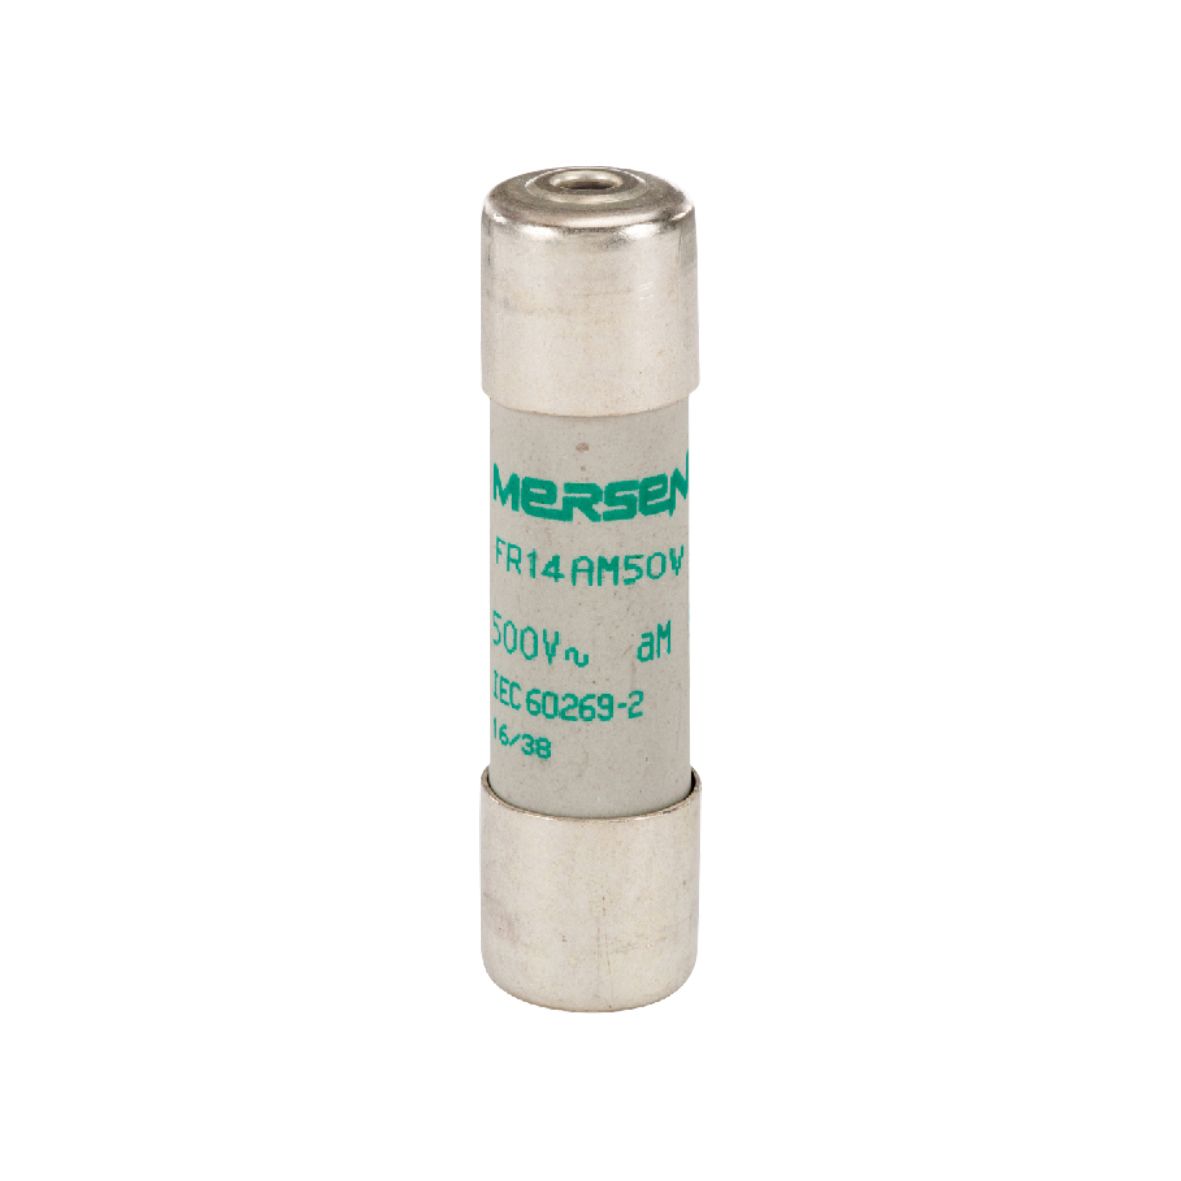 C218203 - Cylindrical fuse-link aM 500VAC 14.3x51, 4A with striker